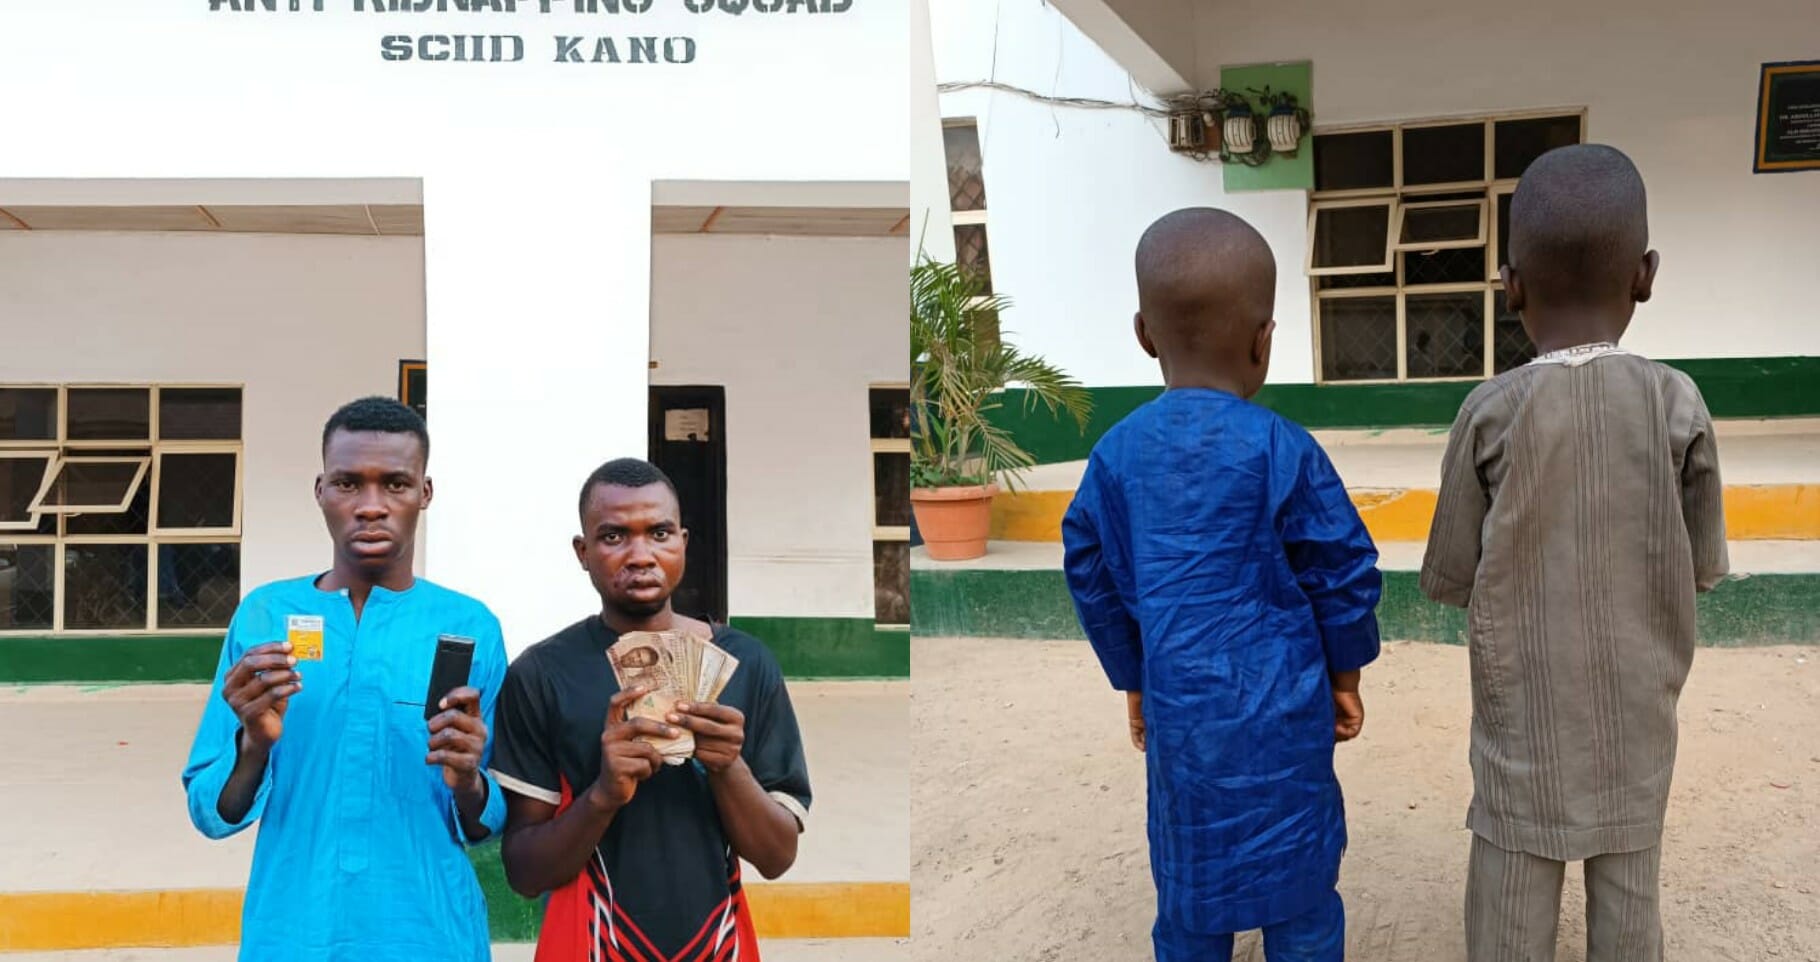 Police rescue two kidnap victims, arrest suspects in Kano